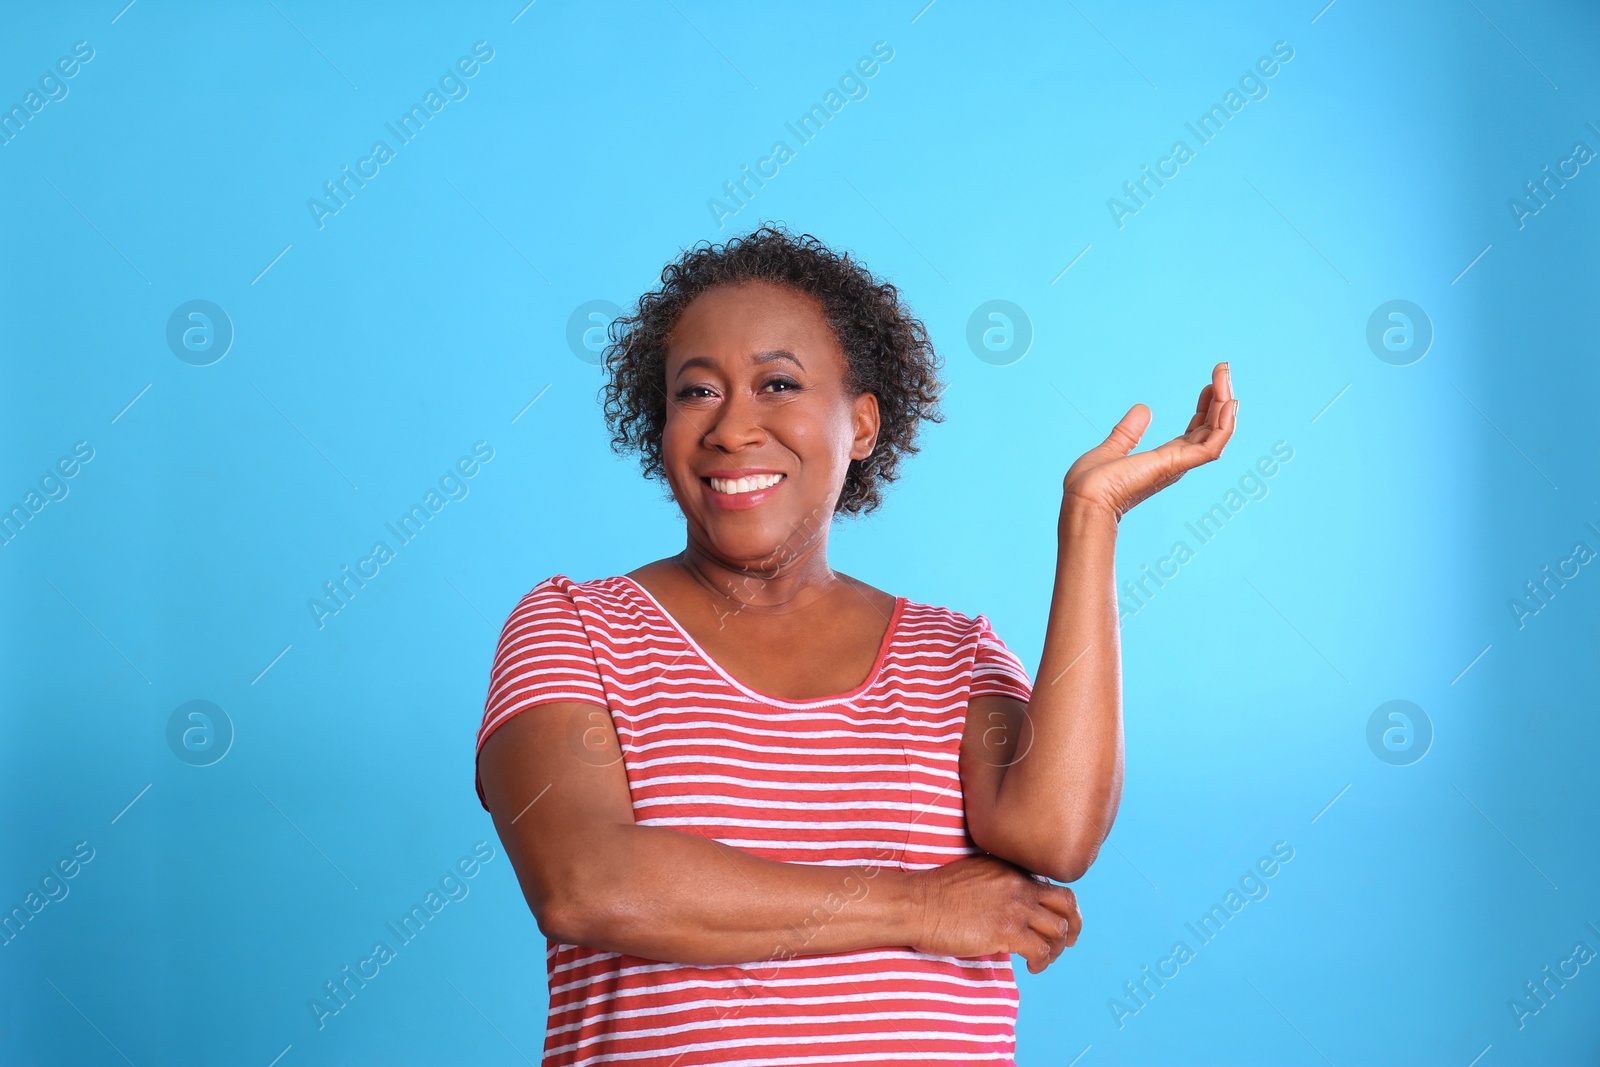 Photo of Portrait of happy African-American woman on light blue background